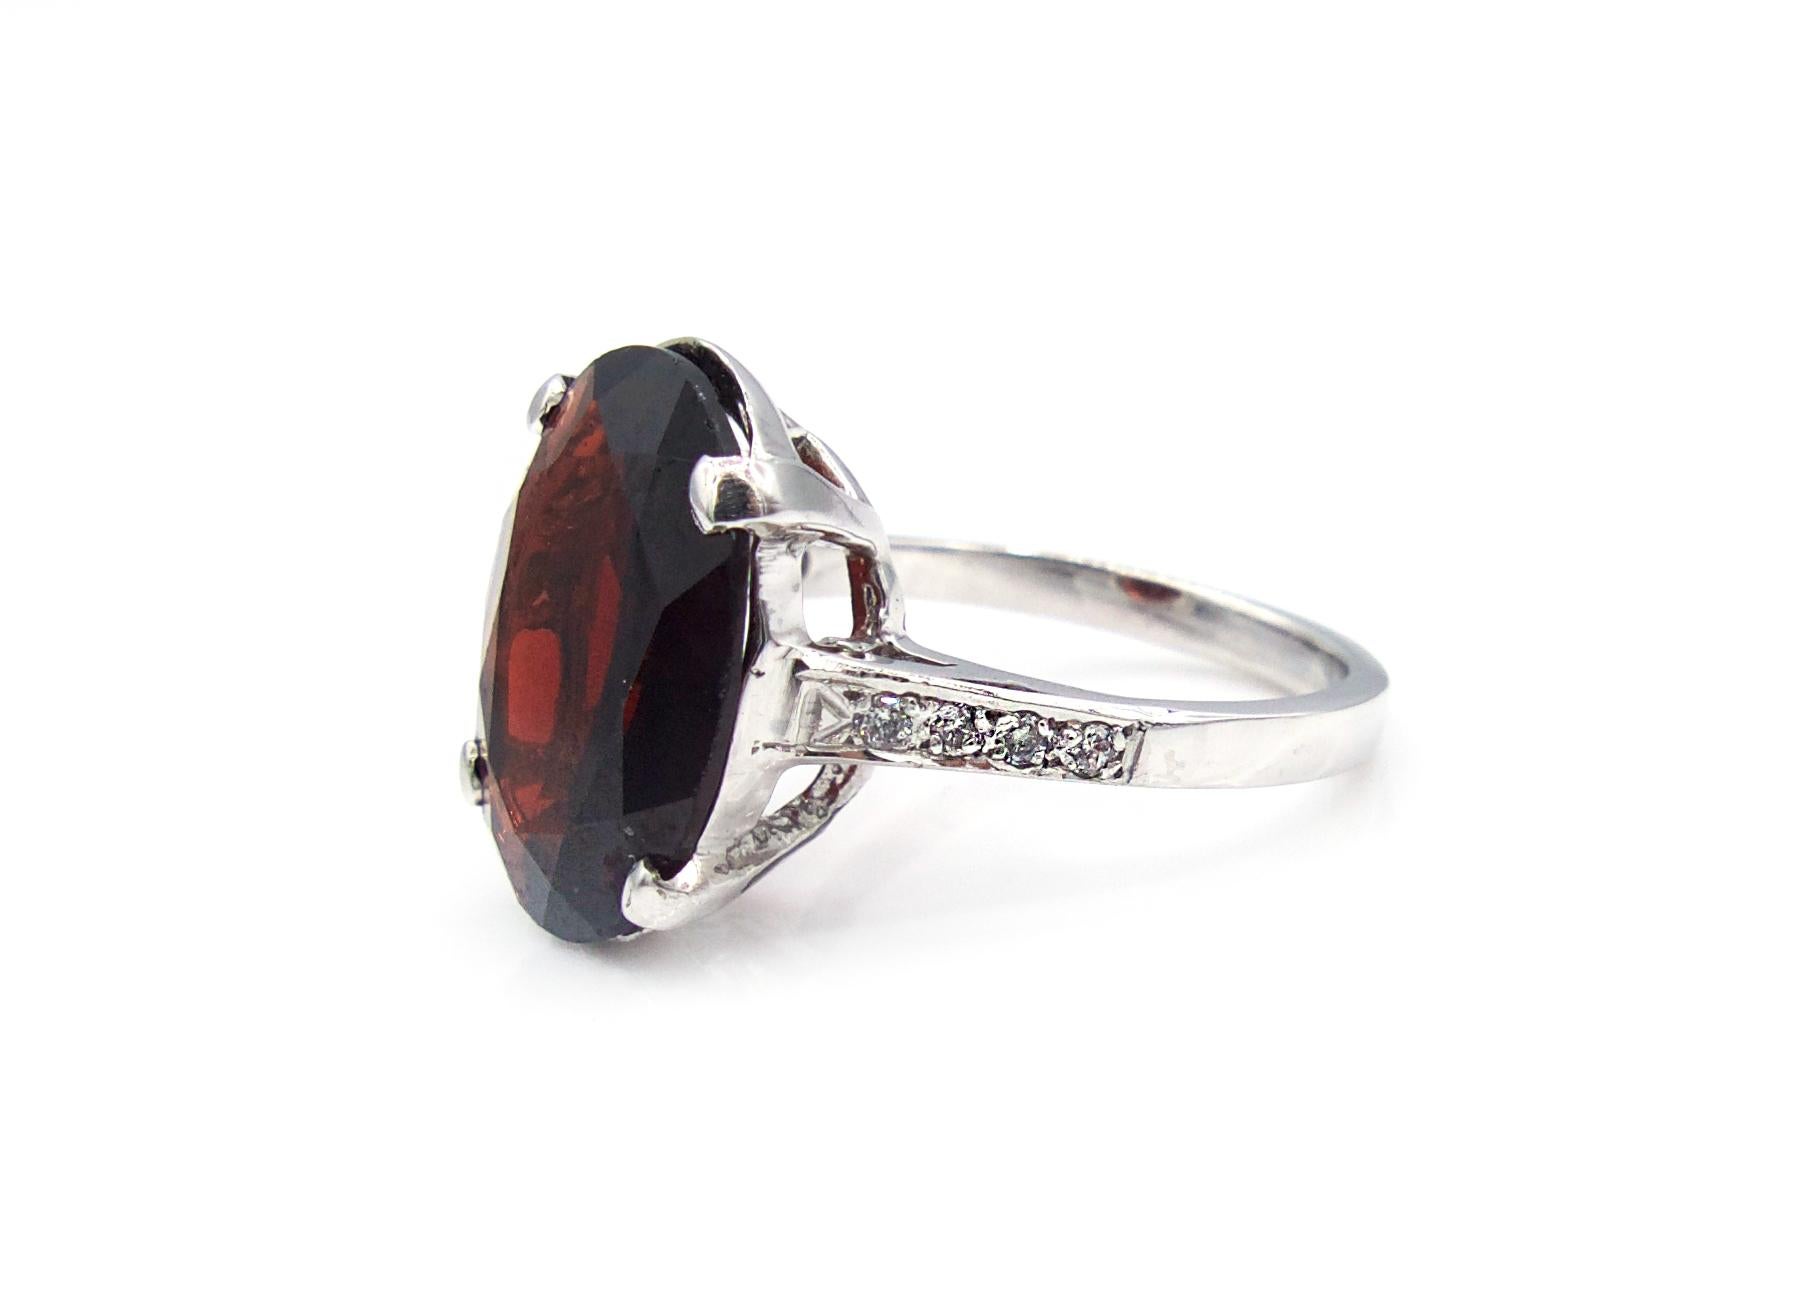 This 6 carat oval faceted garnet is prong set in a 14K white gold band and flanked by 8 bright white round cut diamonds.

5.2 g

Size 6.5

